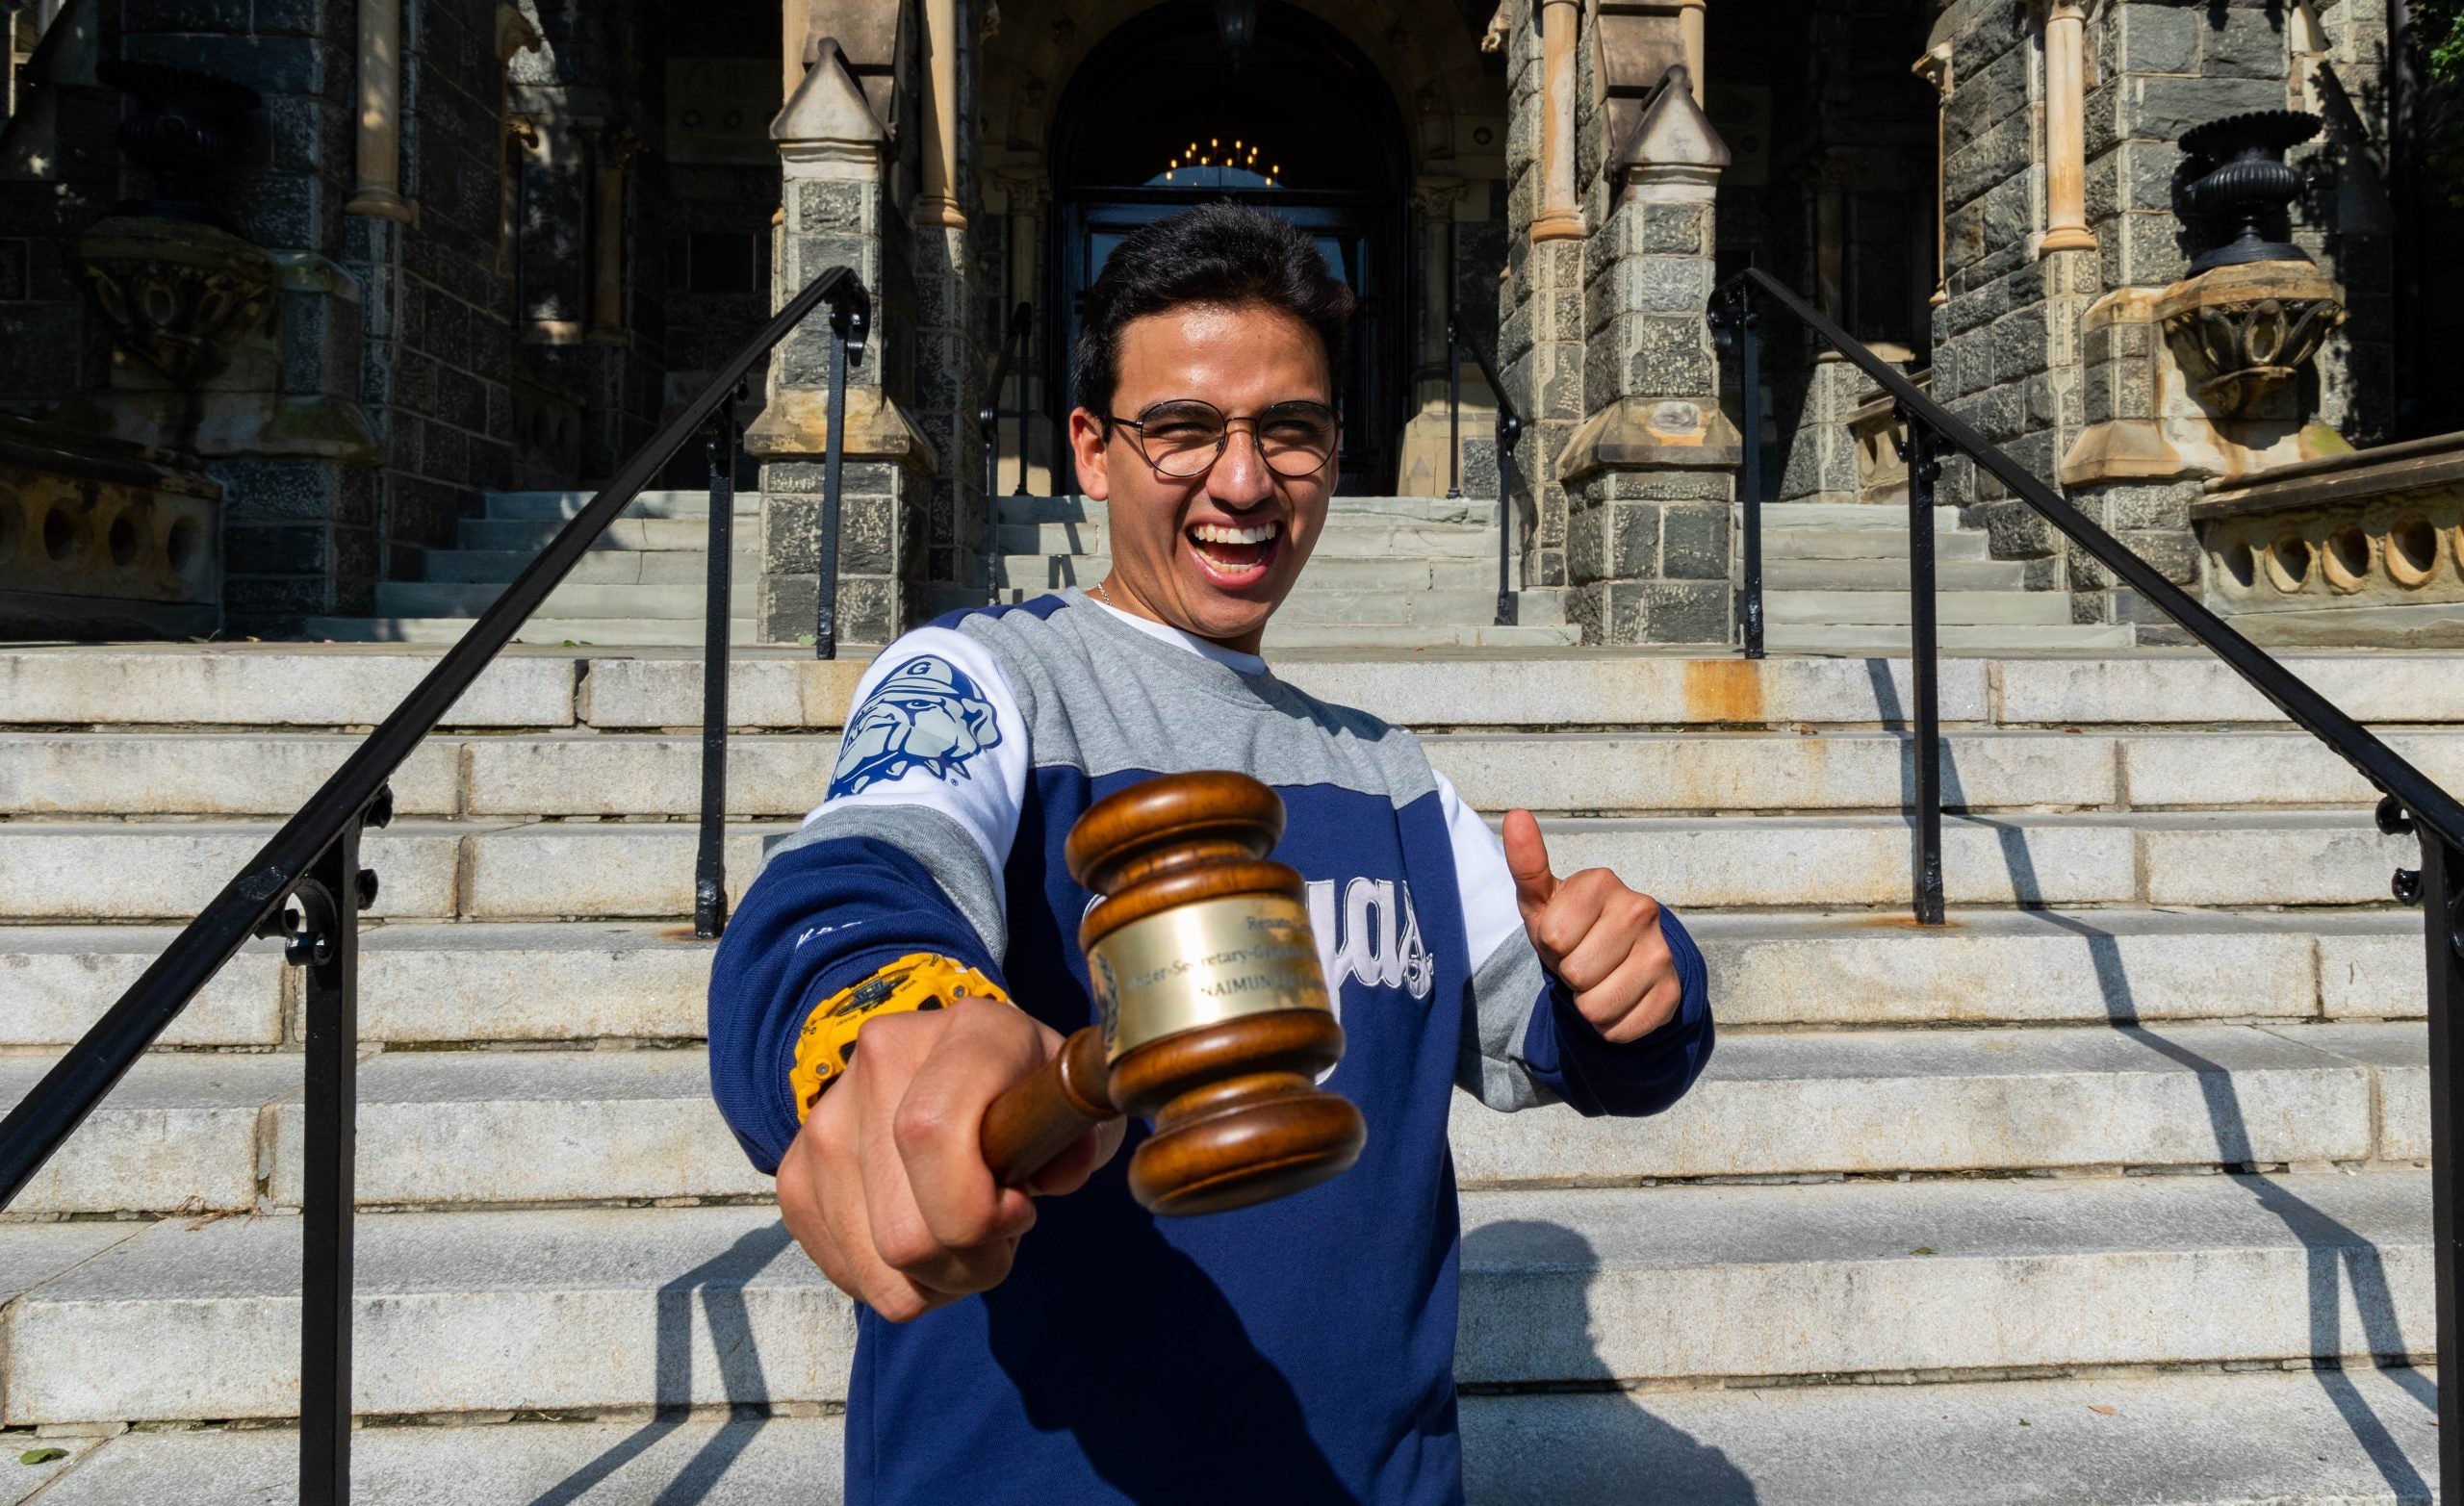 Student in a blue and gray Hoyas sweatshirt holds a gavel and gives a thumbs up